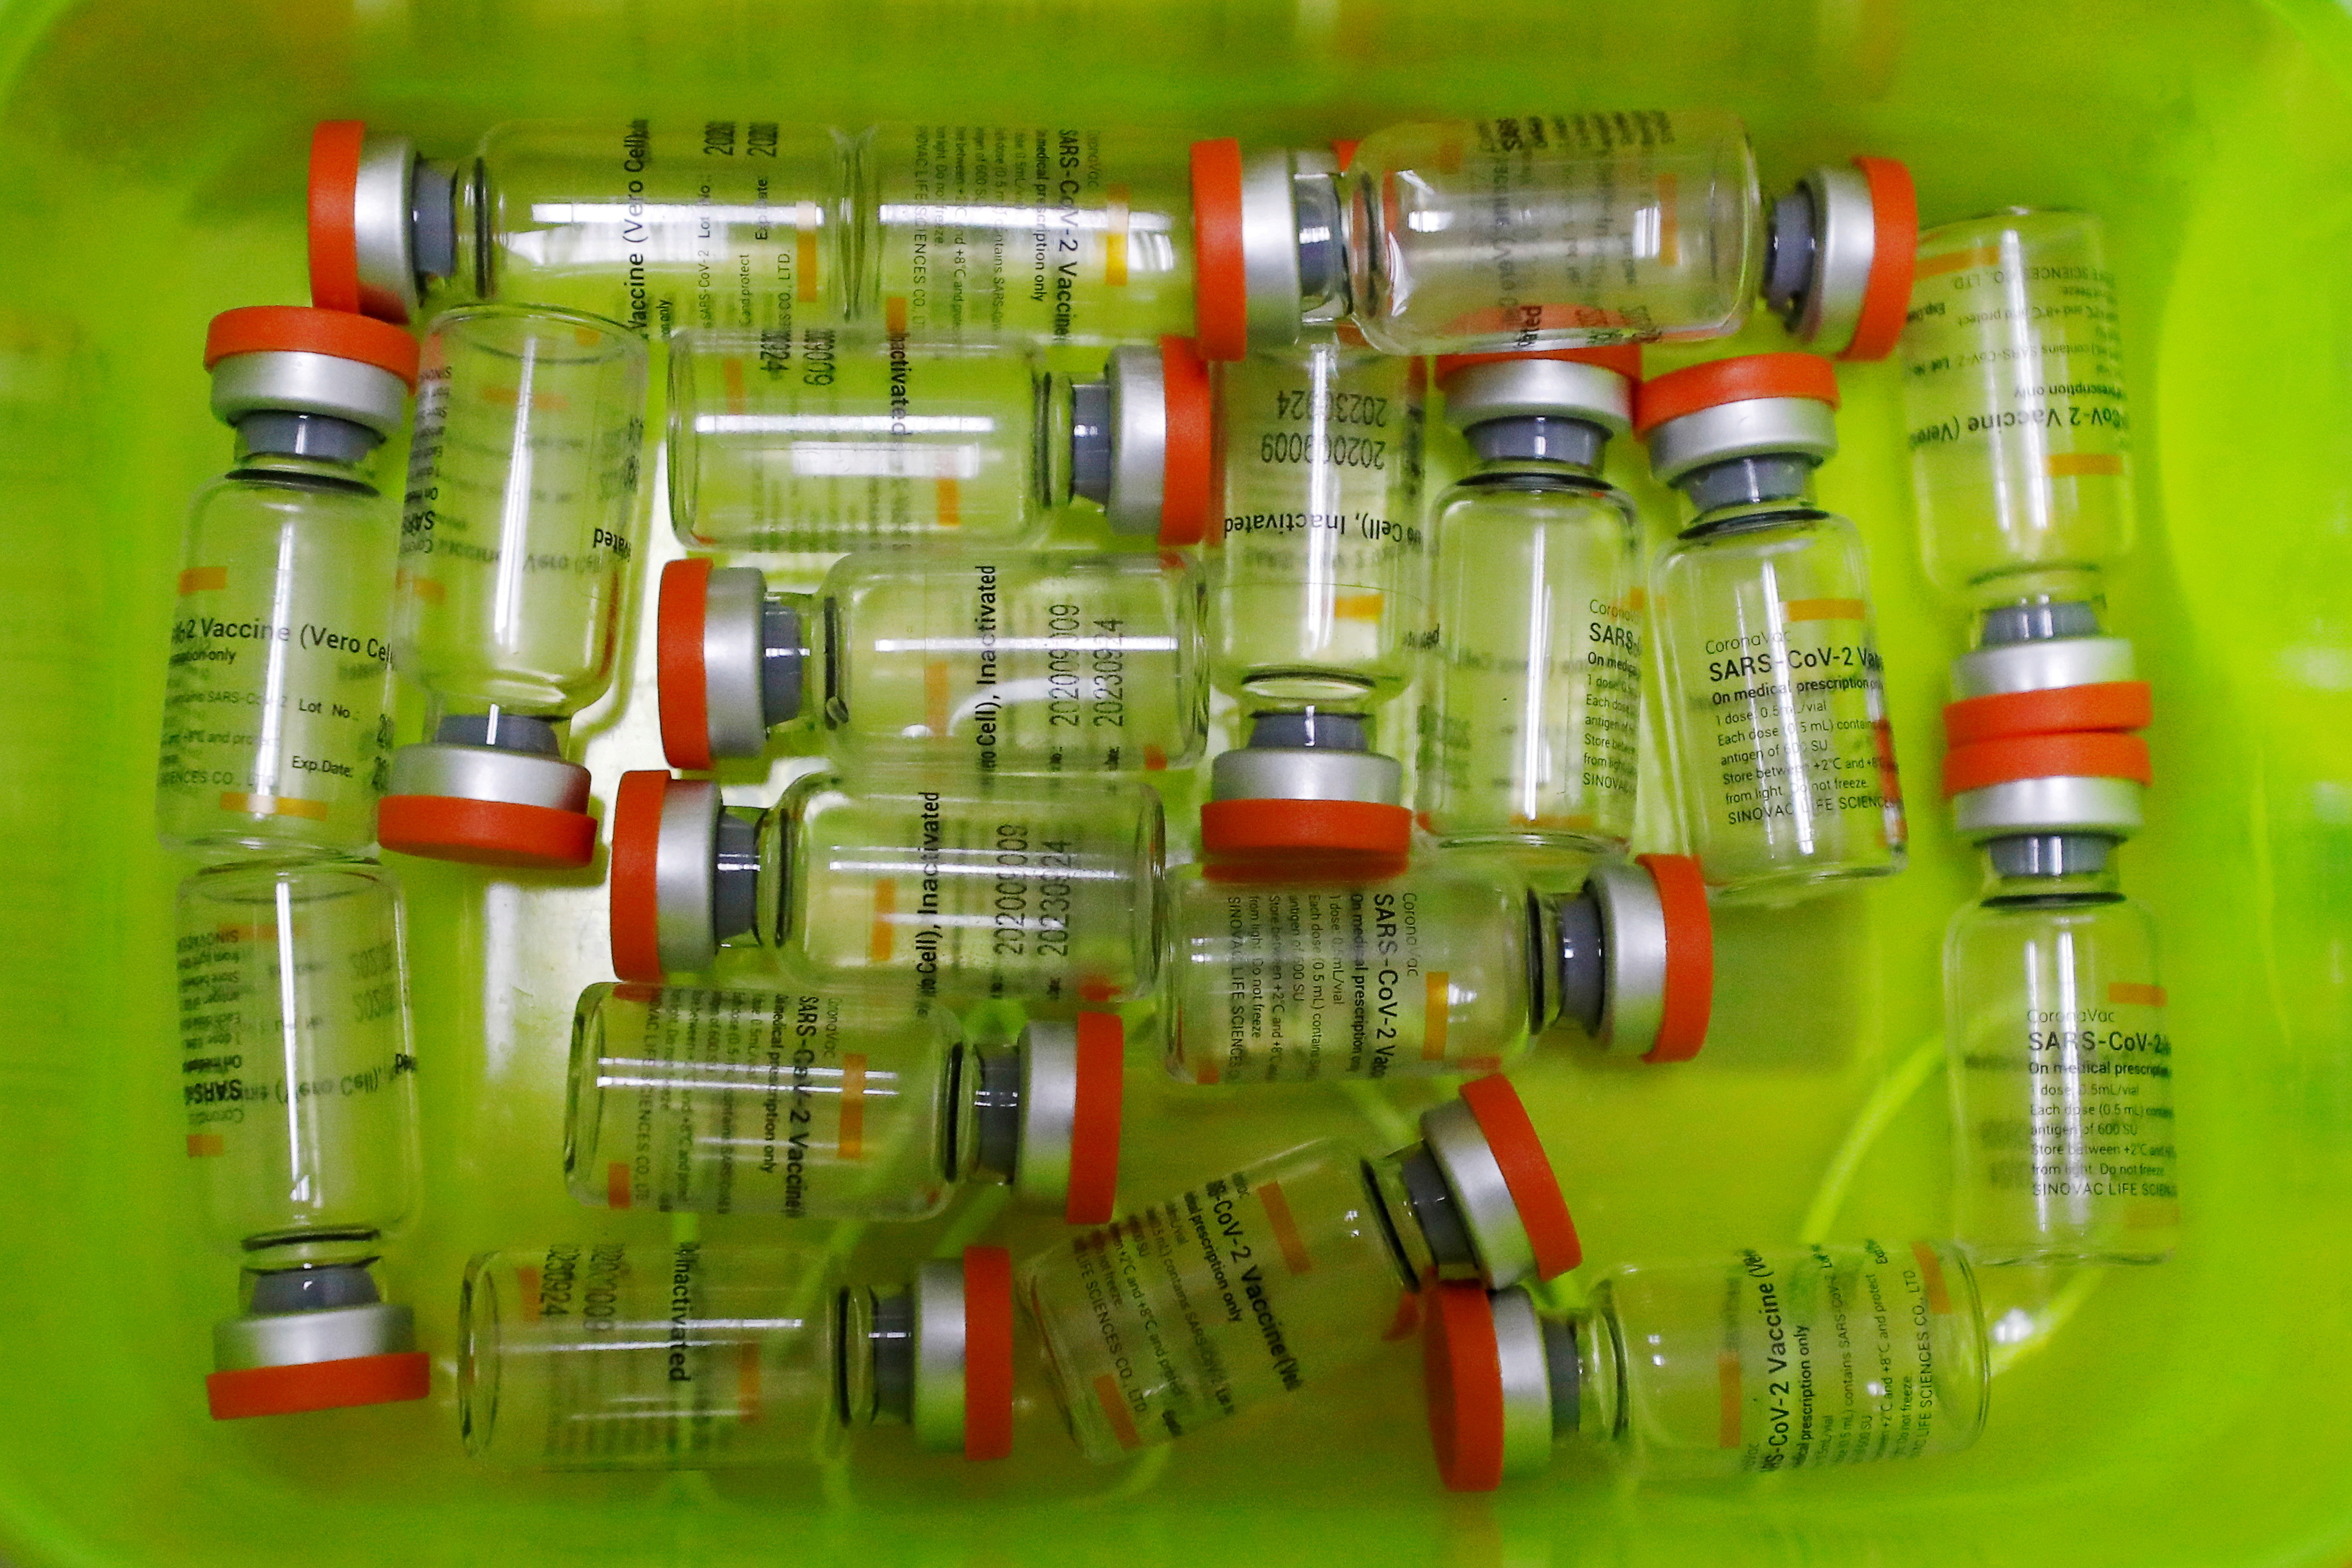 Bottles of the Sinovac vaccine are seen at a hospital in Jakarta